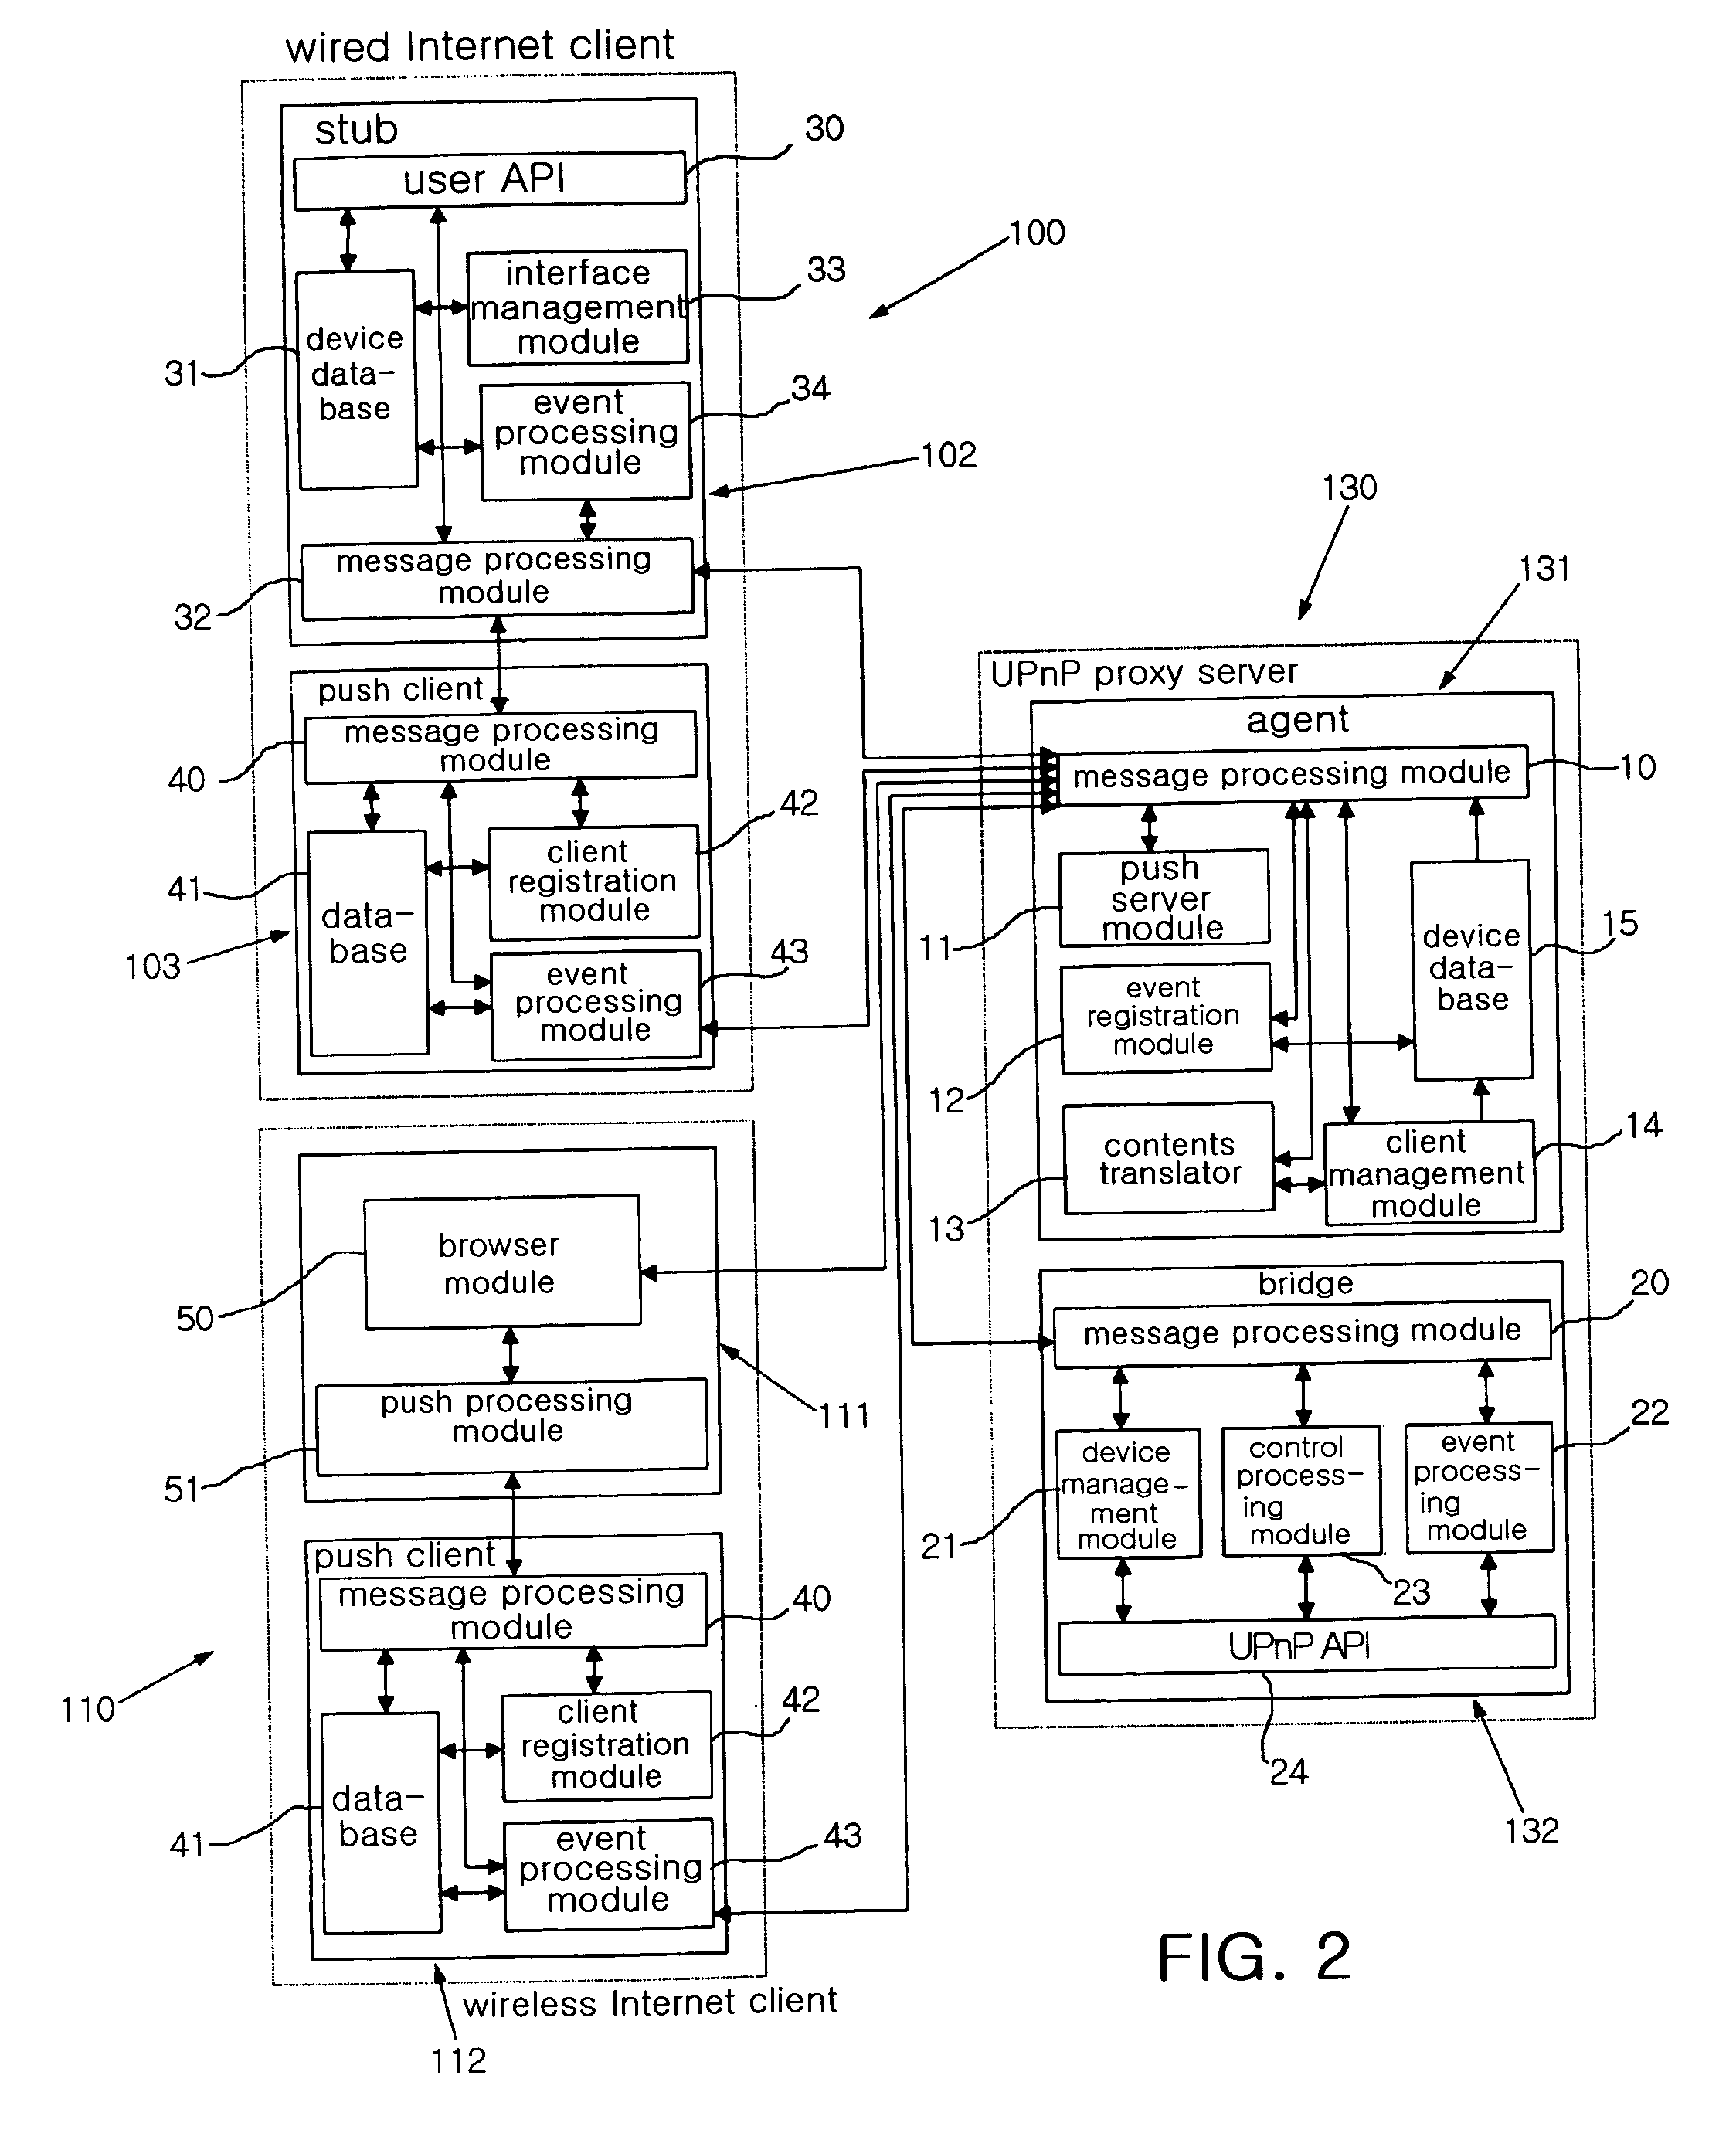 Apparatus and method for managing and controlling UPnP devices in home network over external internet network